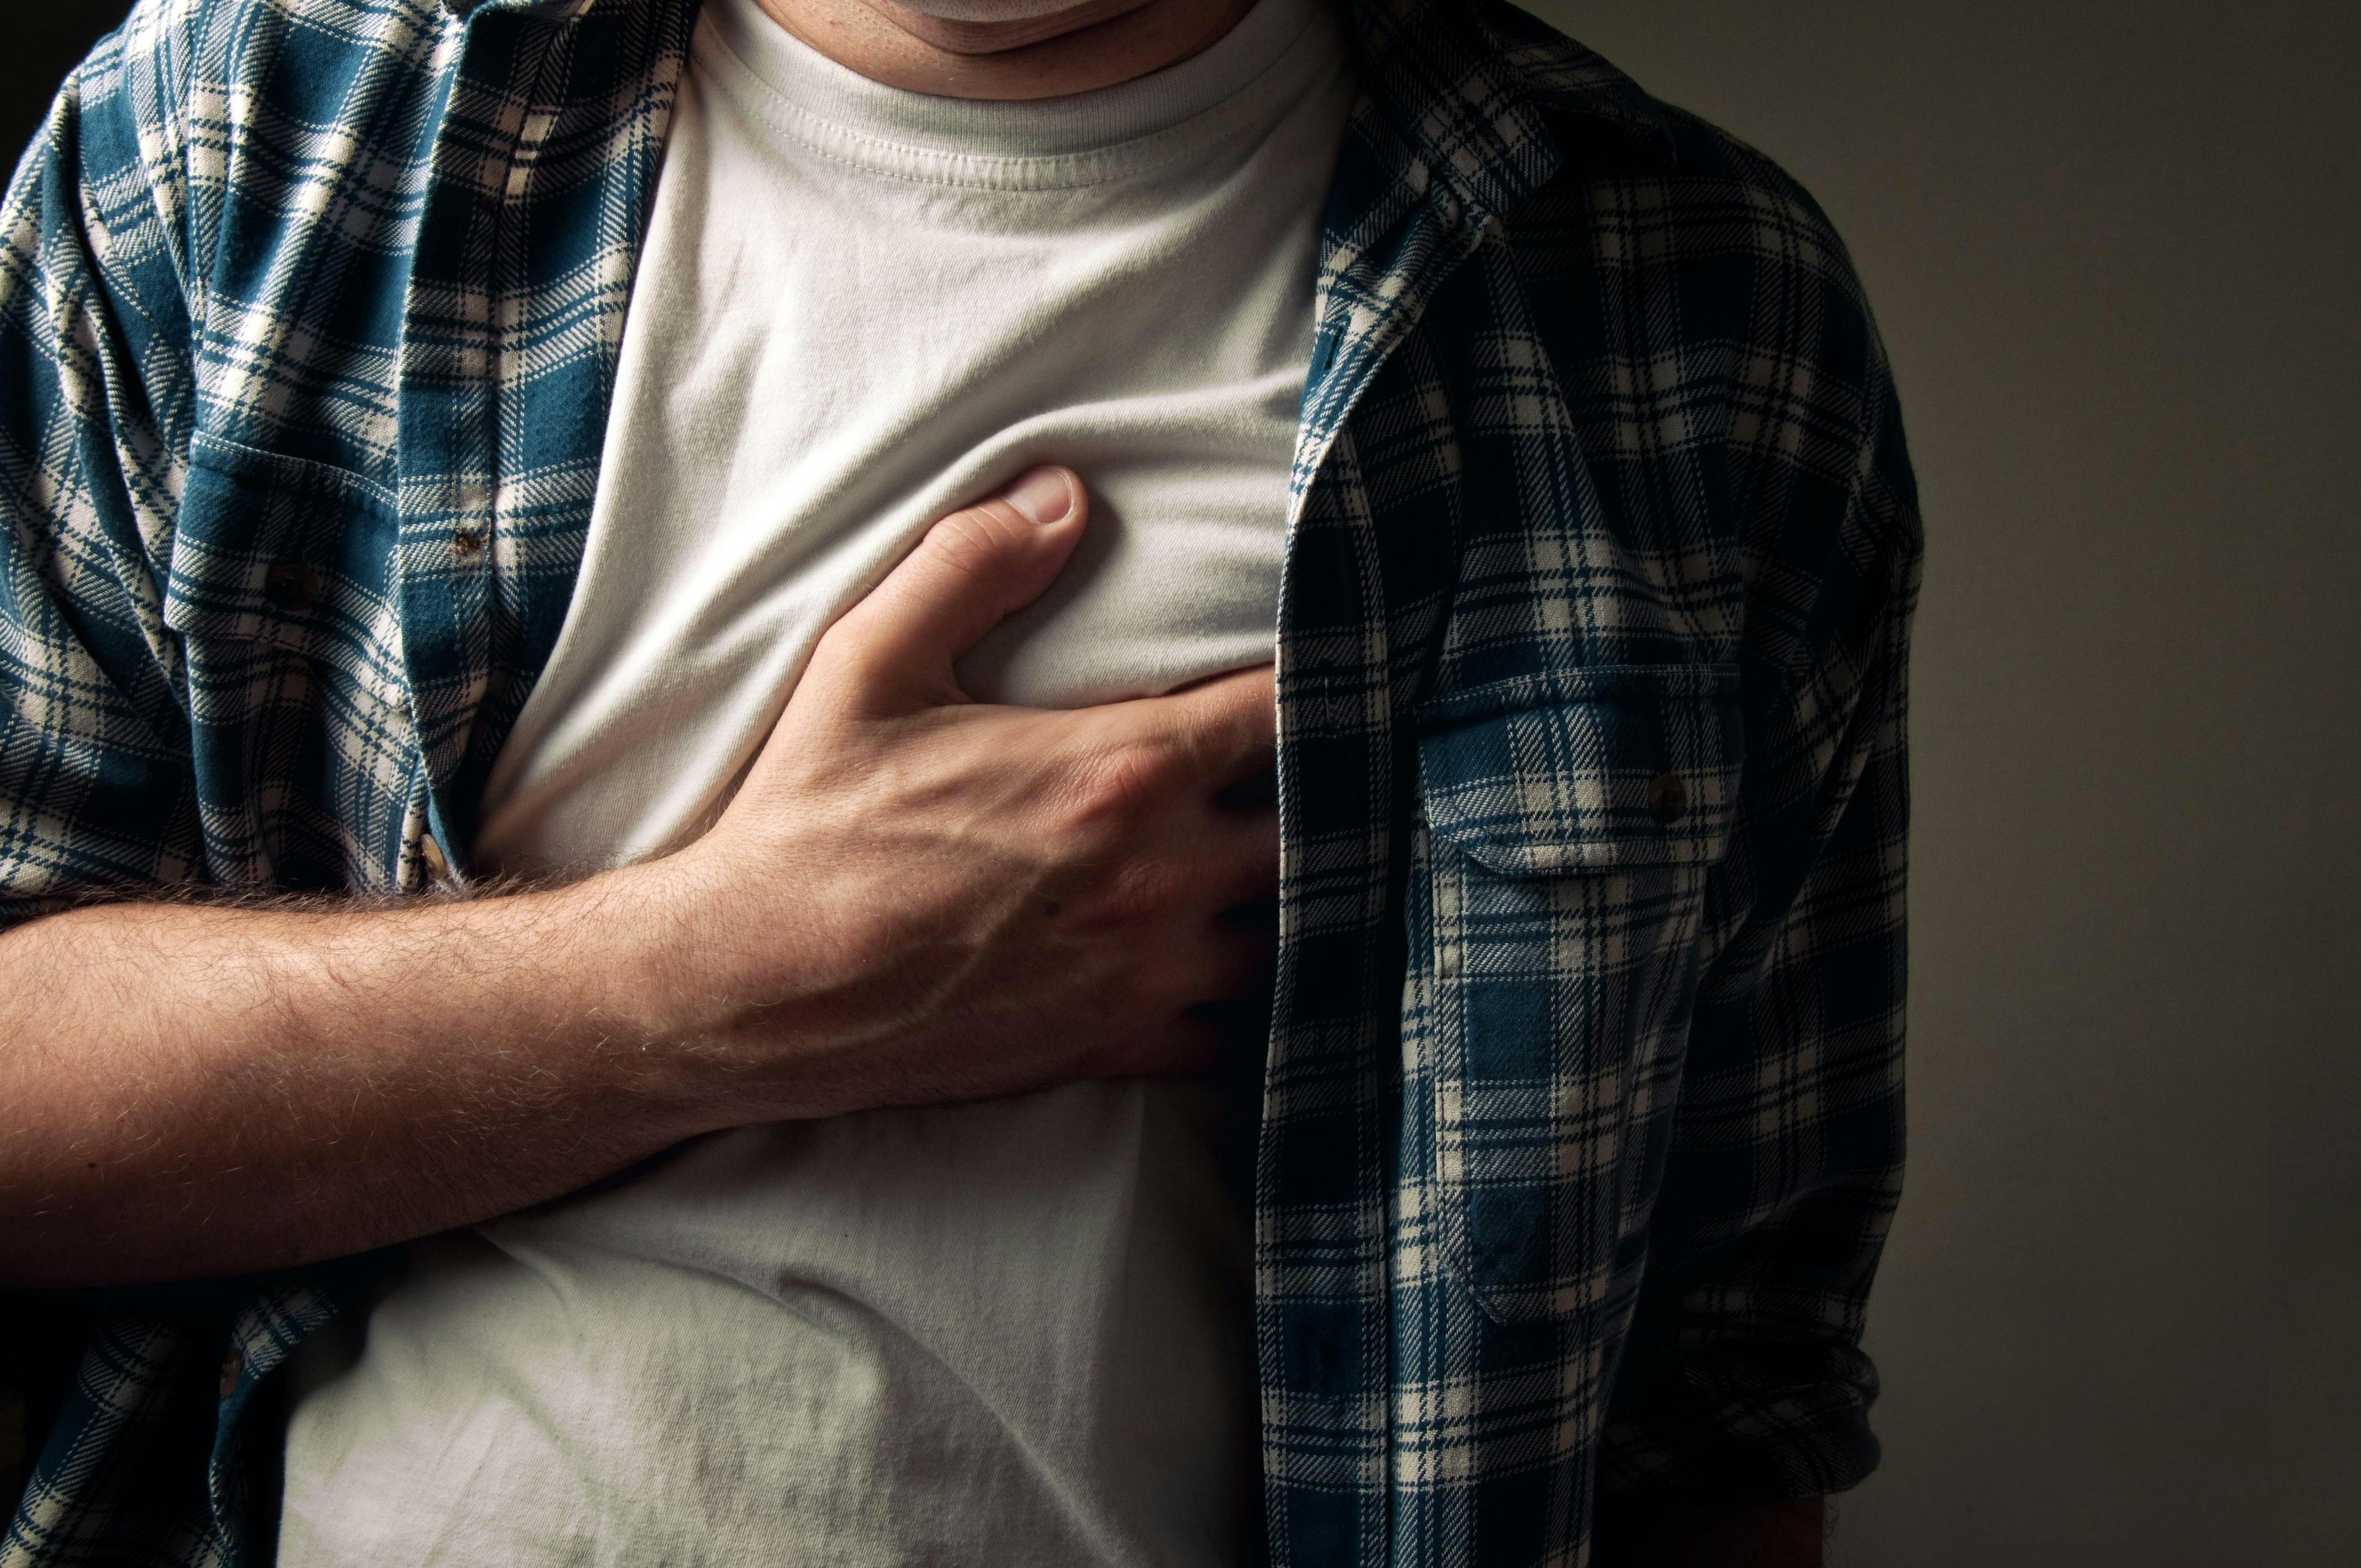 A man dealing with chest pain.